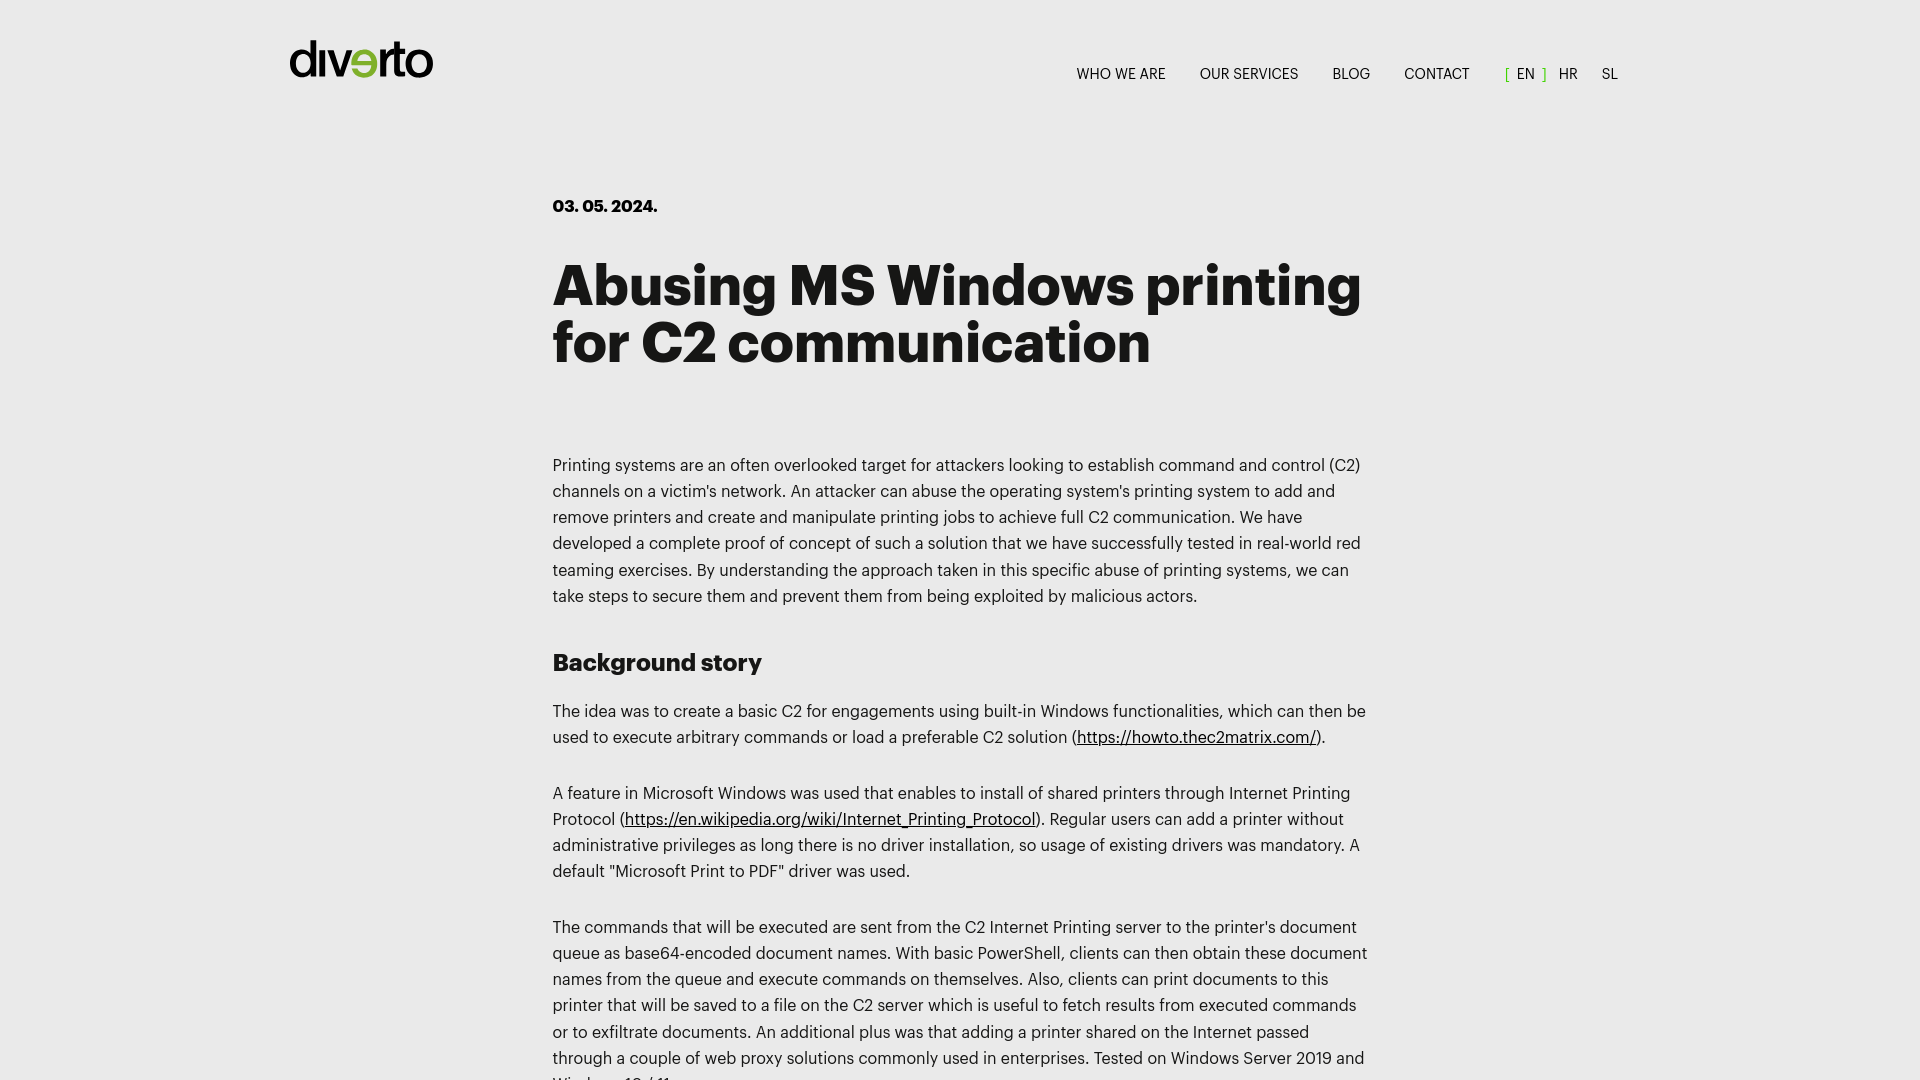 Abusing MS Windows printing for C2 communication